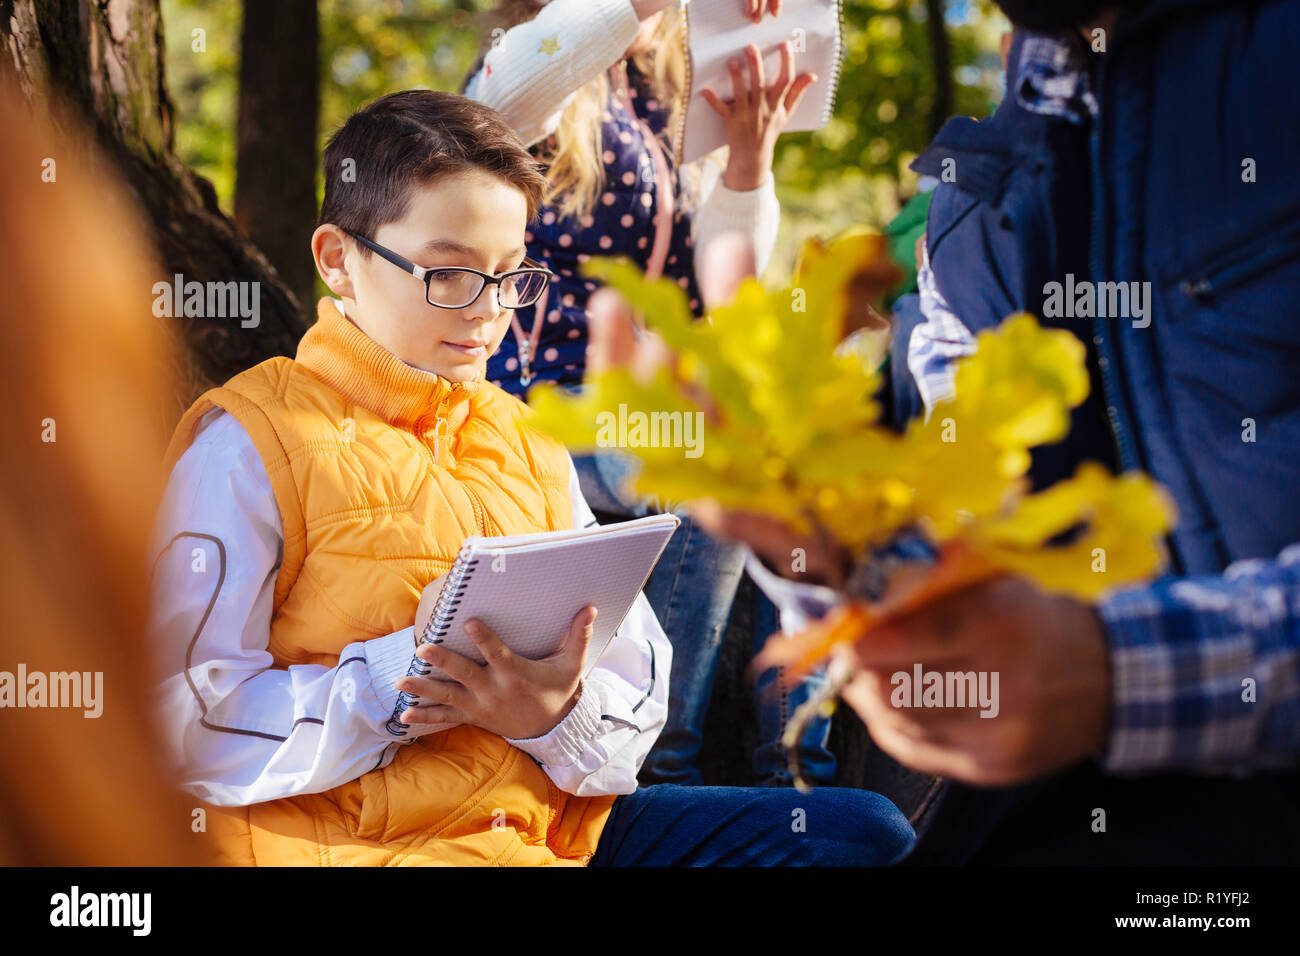 Smart intelligent boy writing in the notebook Stock Photo